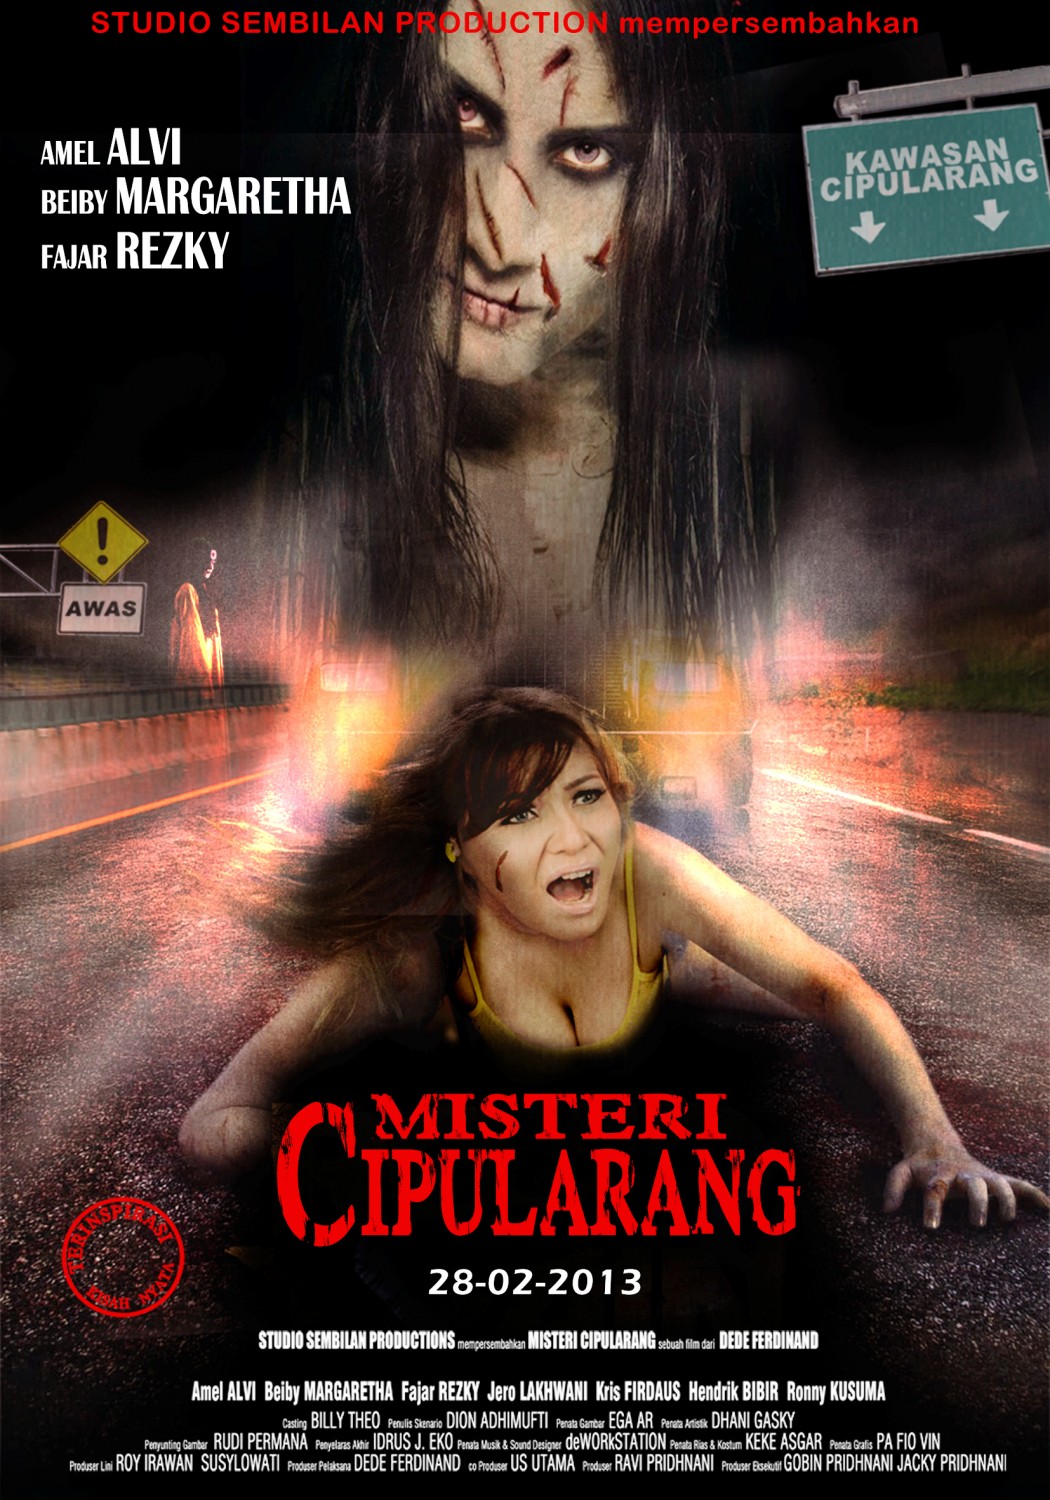 Extra Large Movie Poster Image for Misteri Cipularang (#1 of 2)